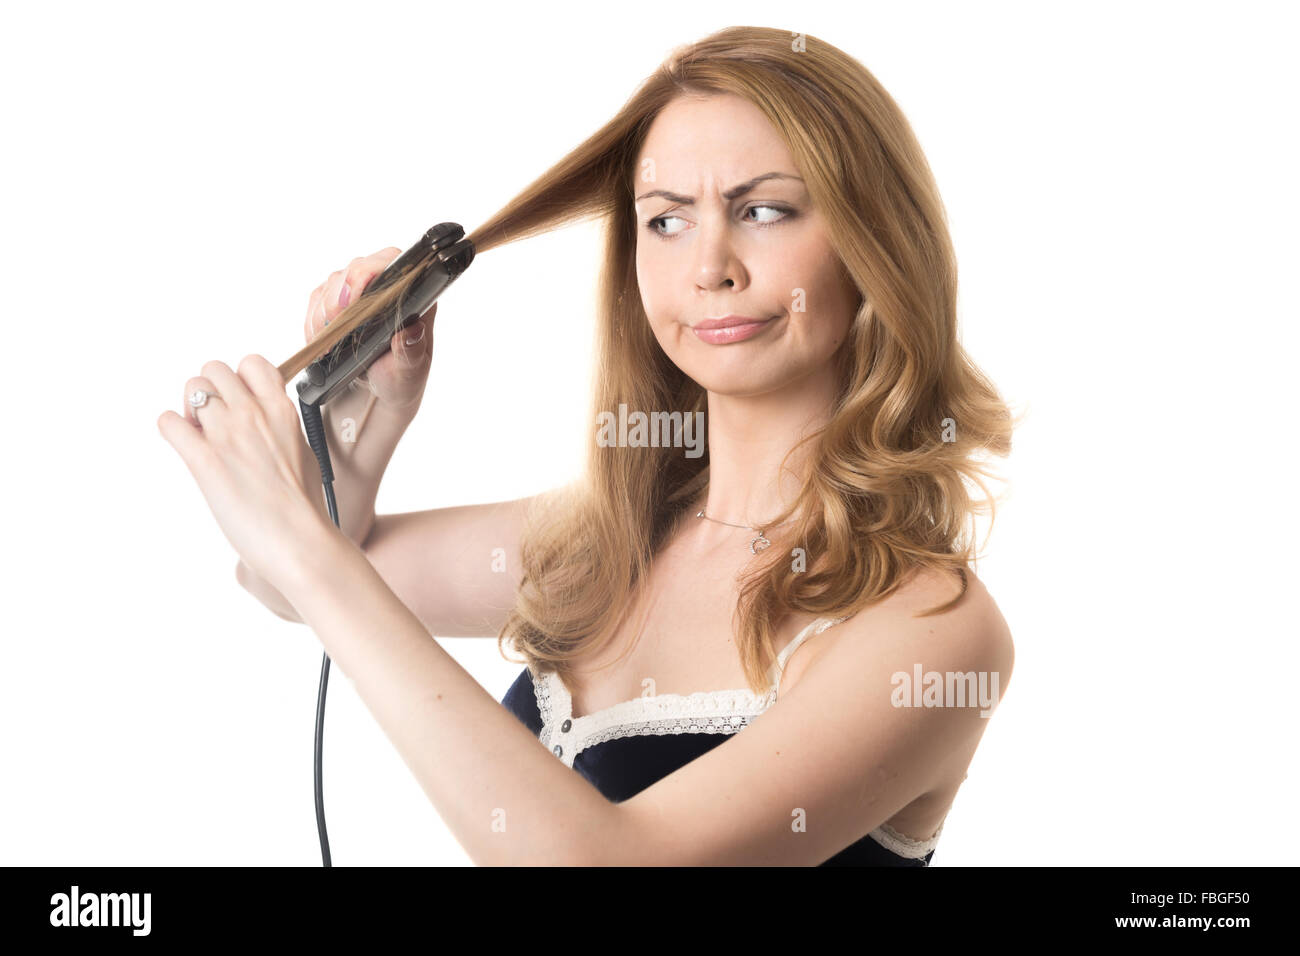 Funny frowning young attractive blond woman holding hair straightener, in  bad mood because of her hairstyle, studio isolated por Stock Photo - Alamy